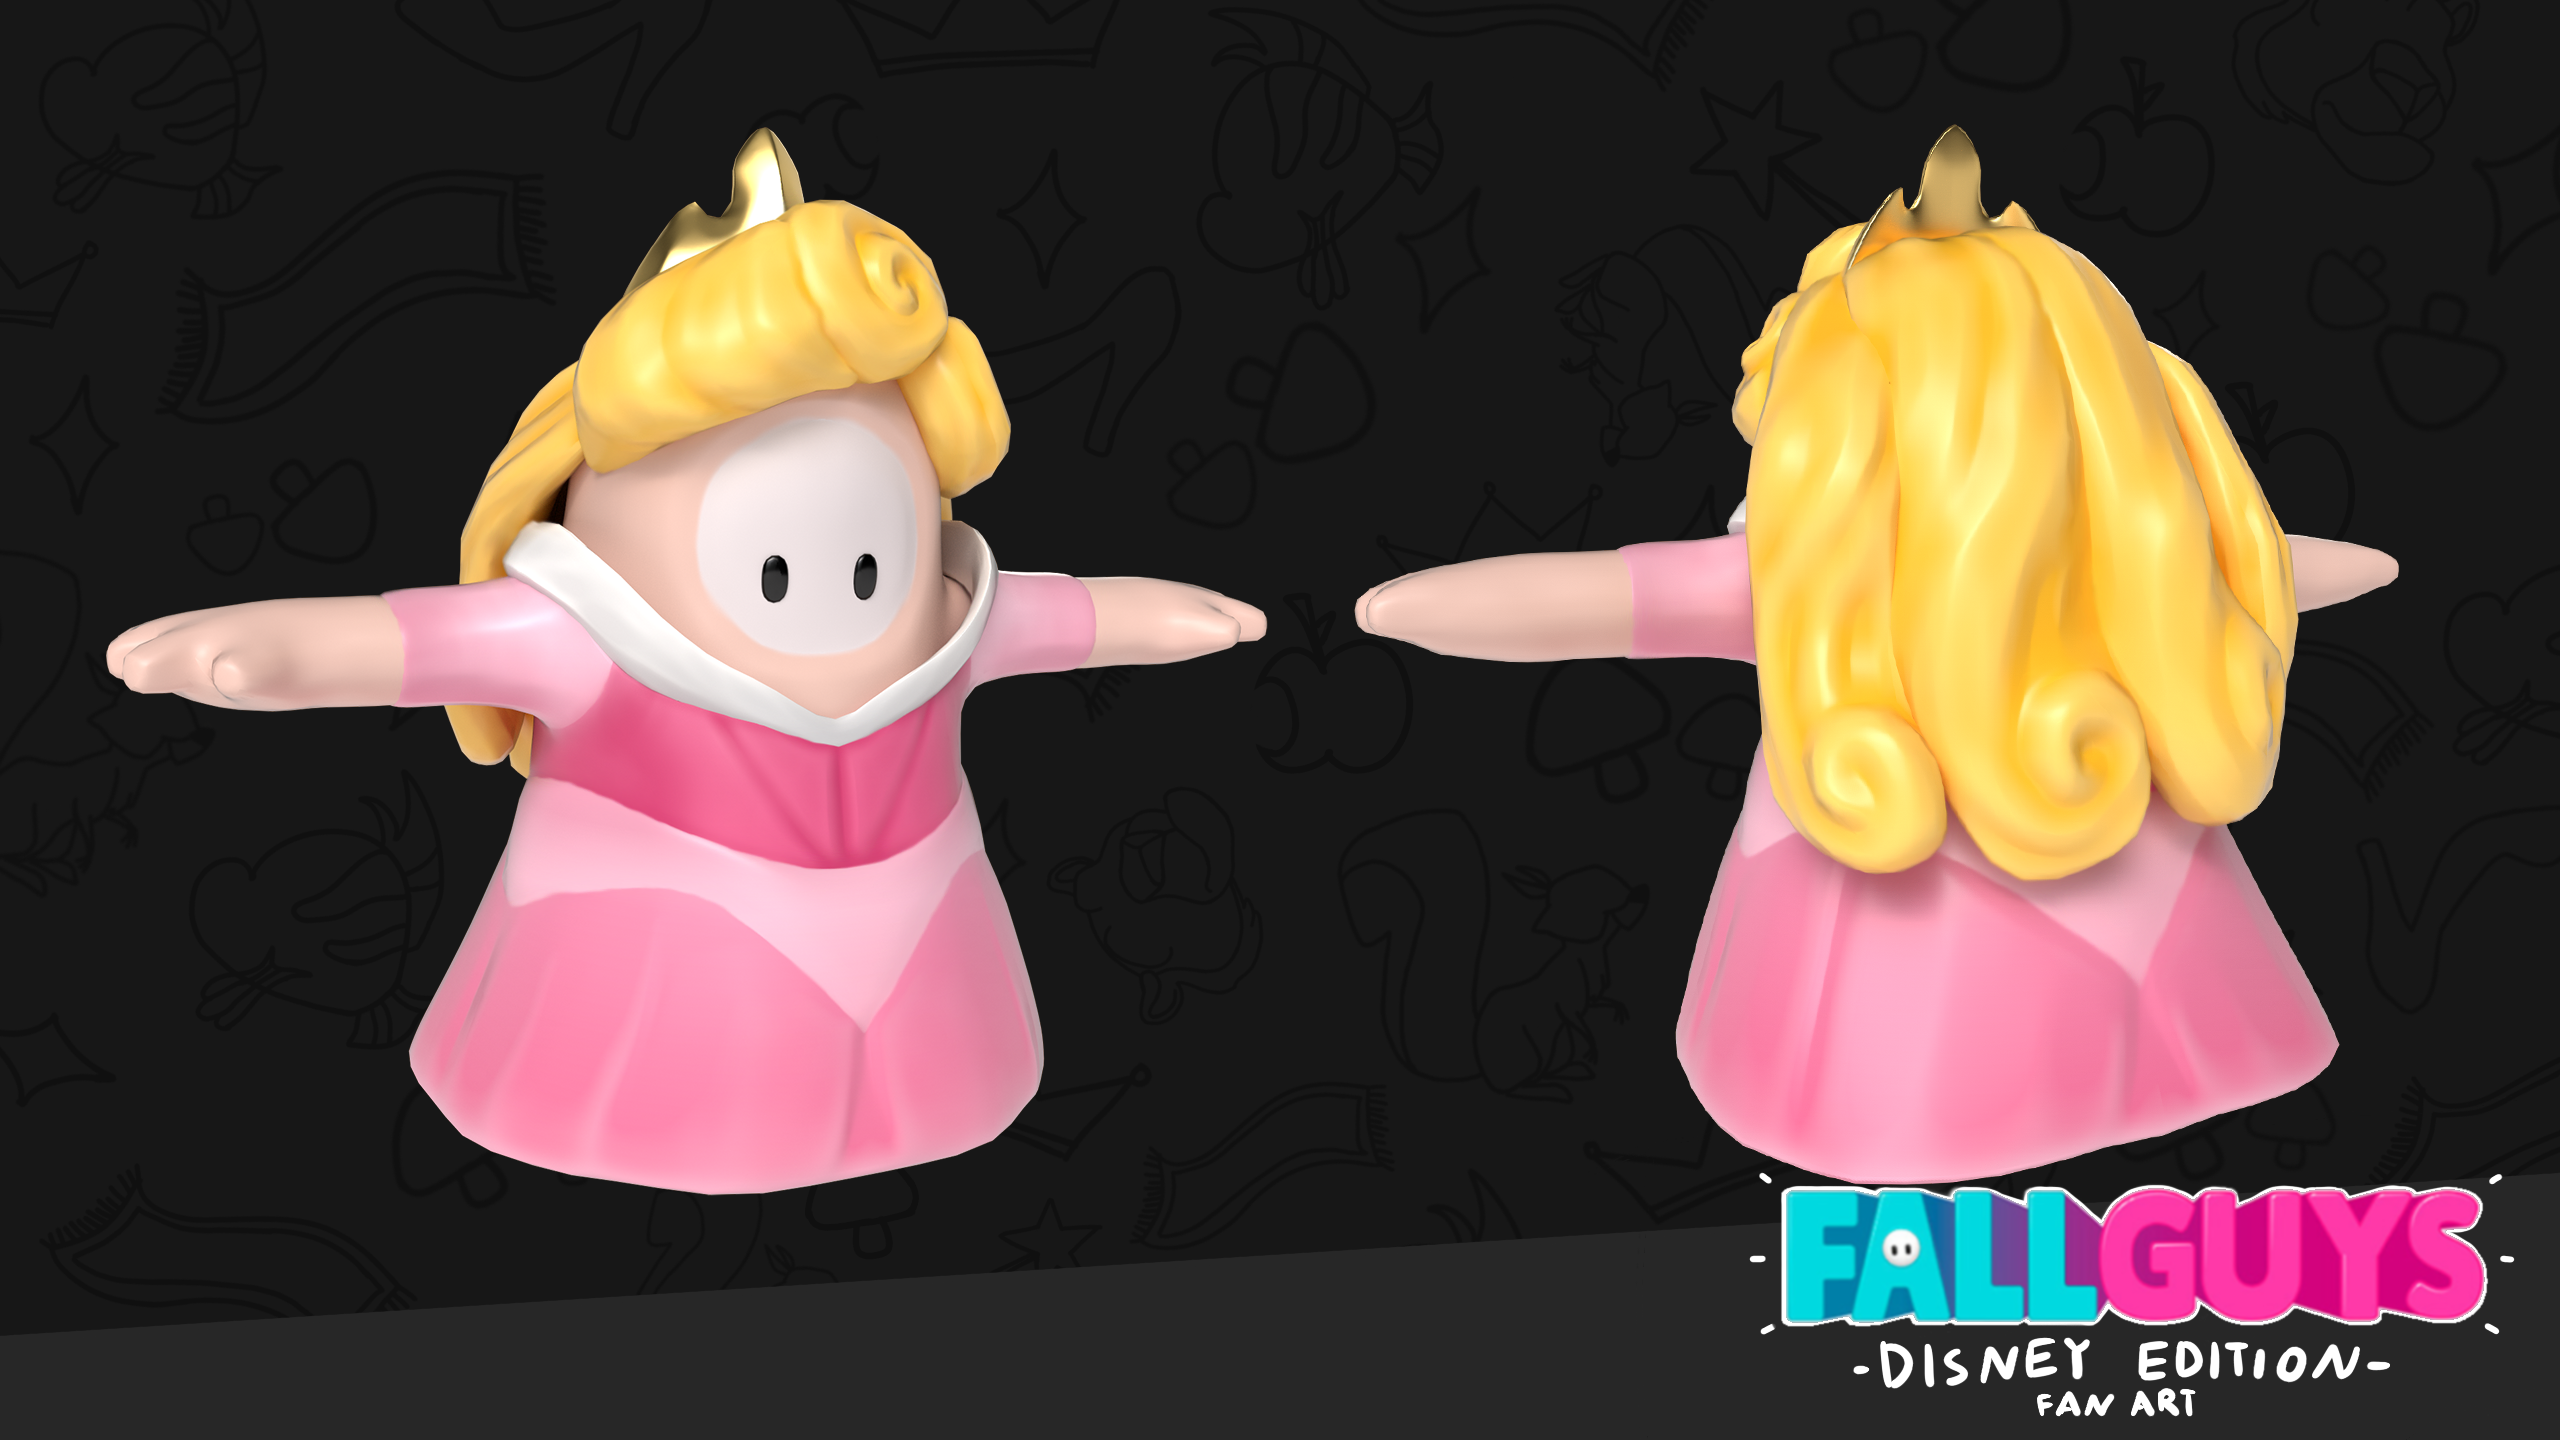 A 3D model of the character Aurora in the style of Fall Guys